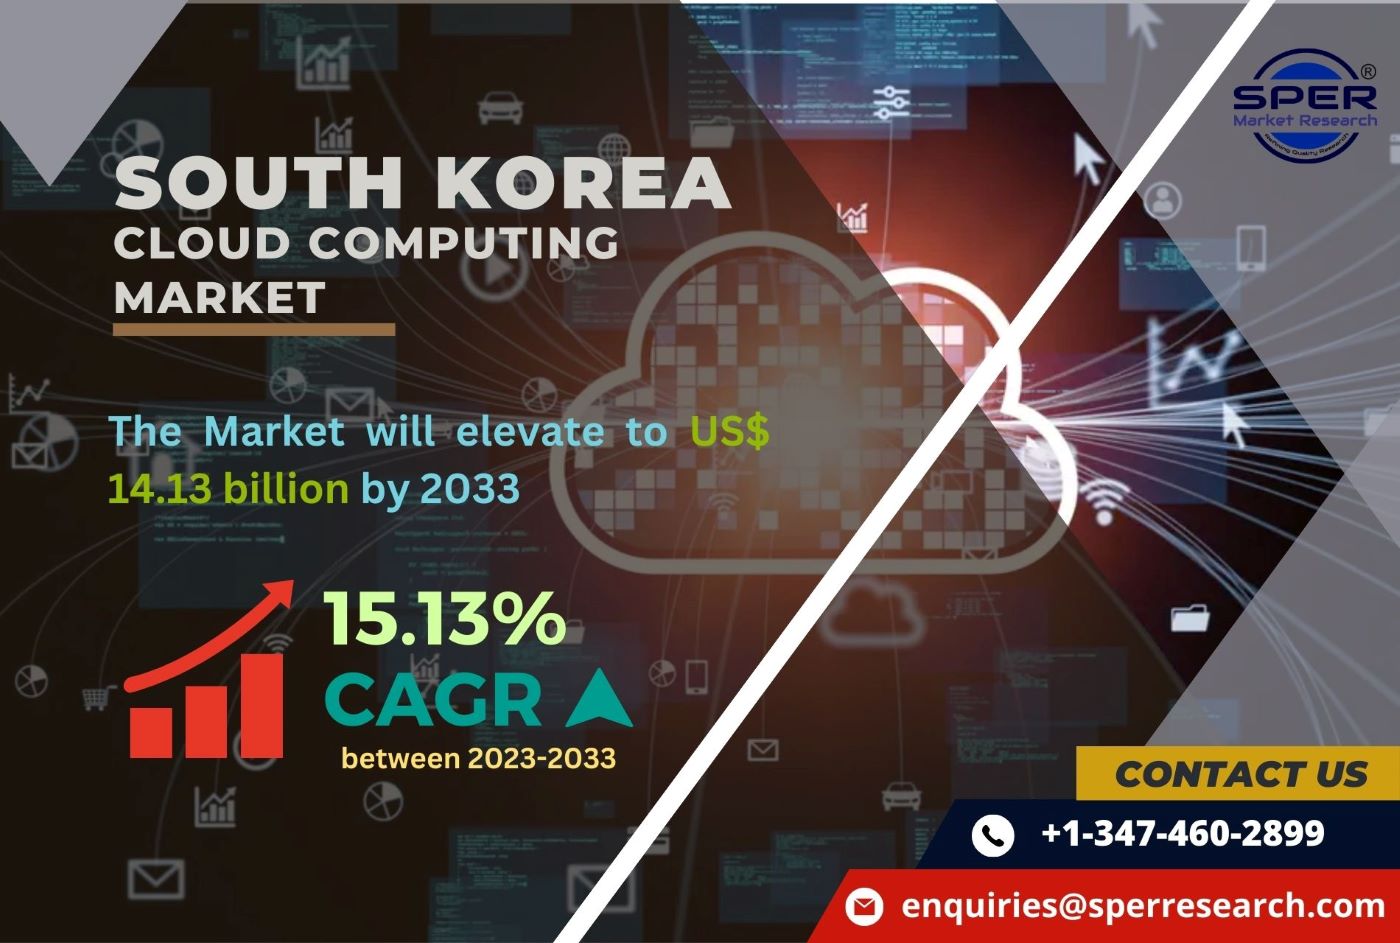 South Korea Cloud Computing Market Trends, Share, Revenue, Growth Drivers, Business Challenges, Opportunities and Future Outlook till 2033: SPER Market Research